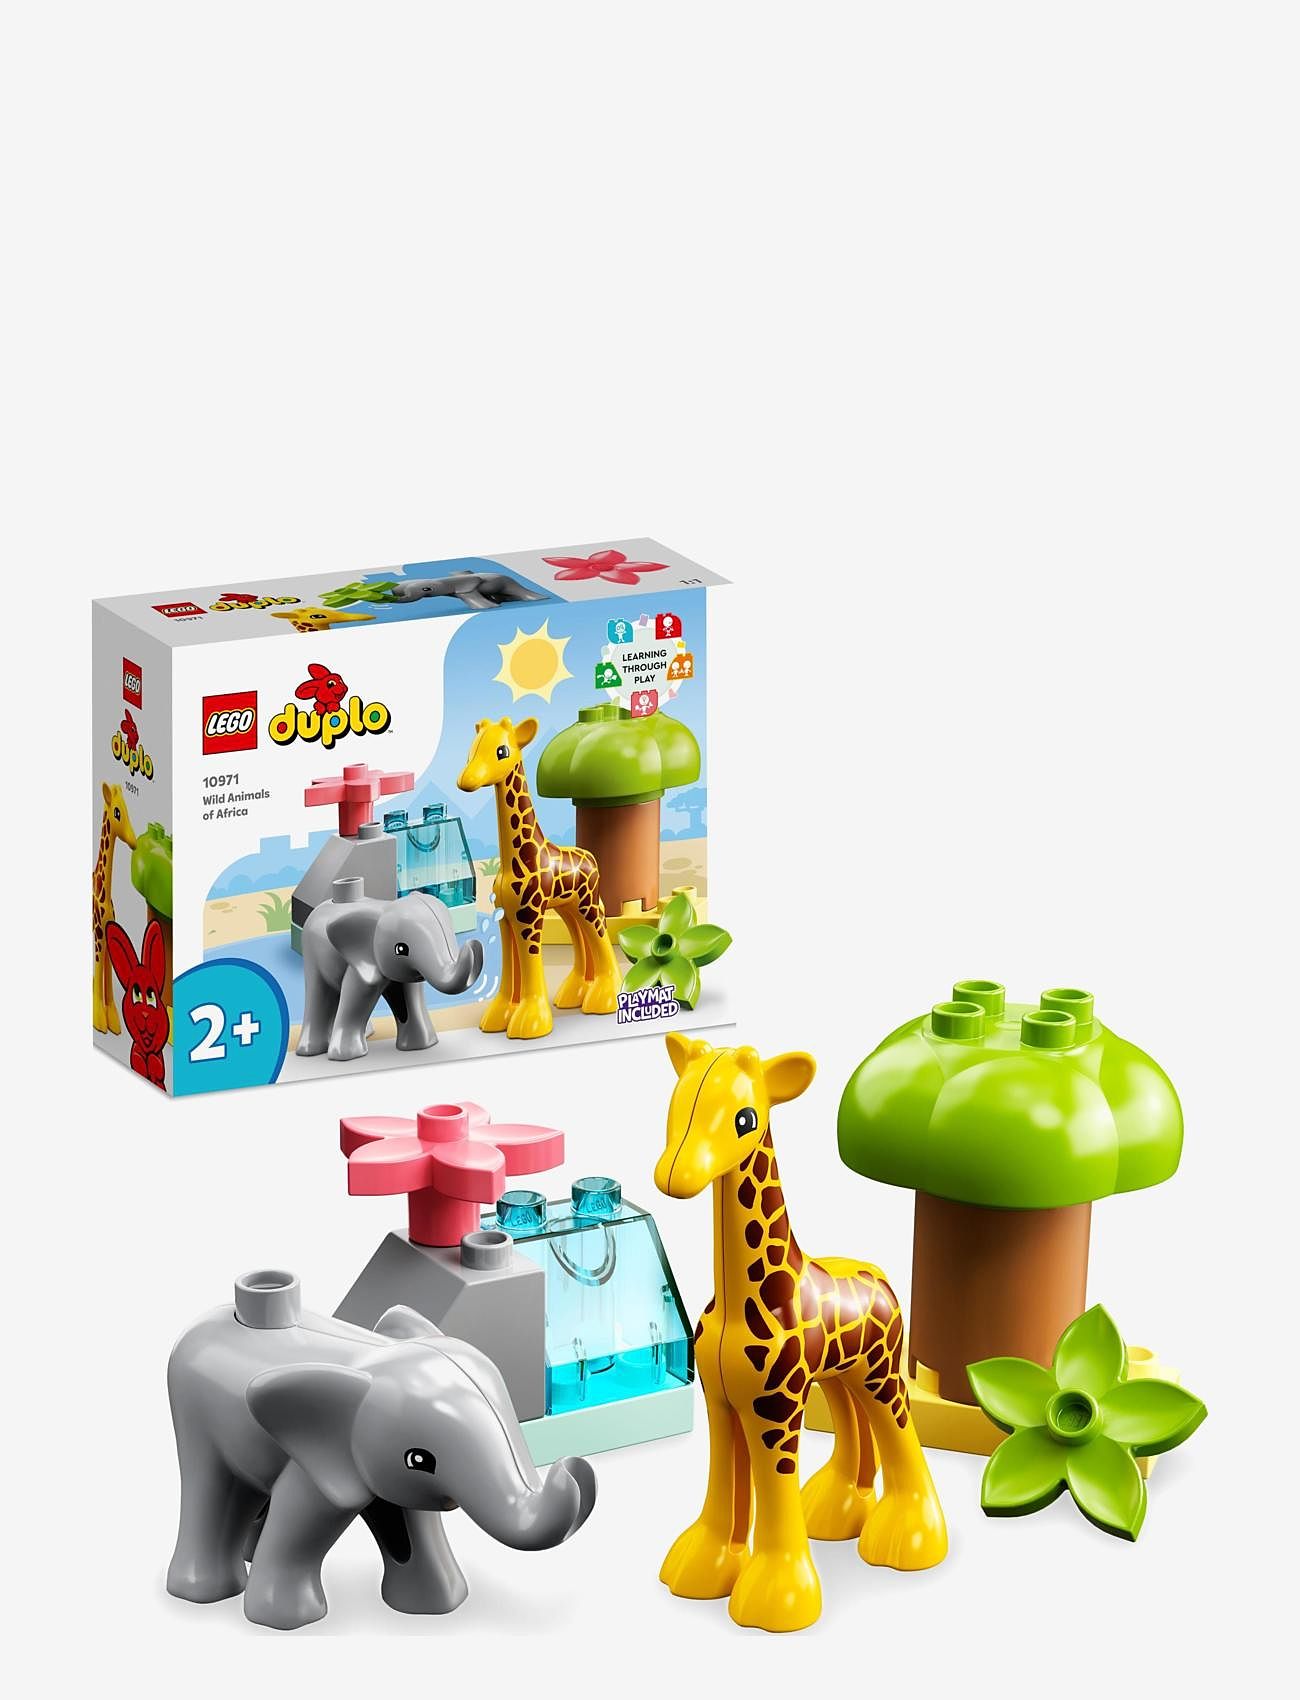 LEGO - Wild Animals of Africa Toy for Toddlers - lego® duplo® - multicolor - 1